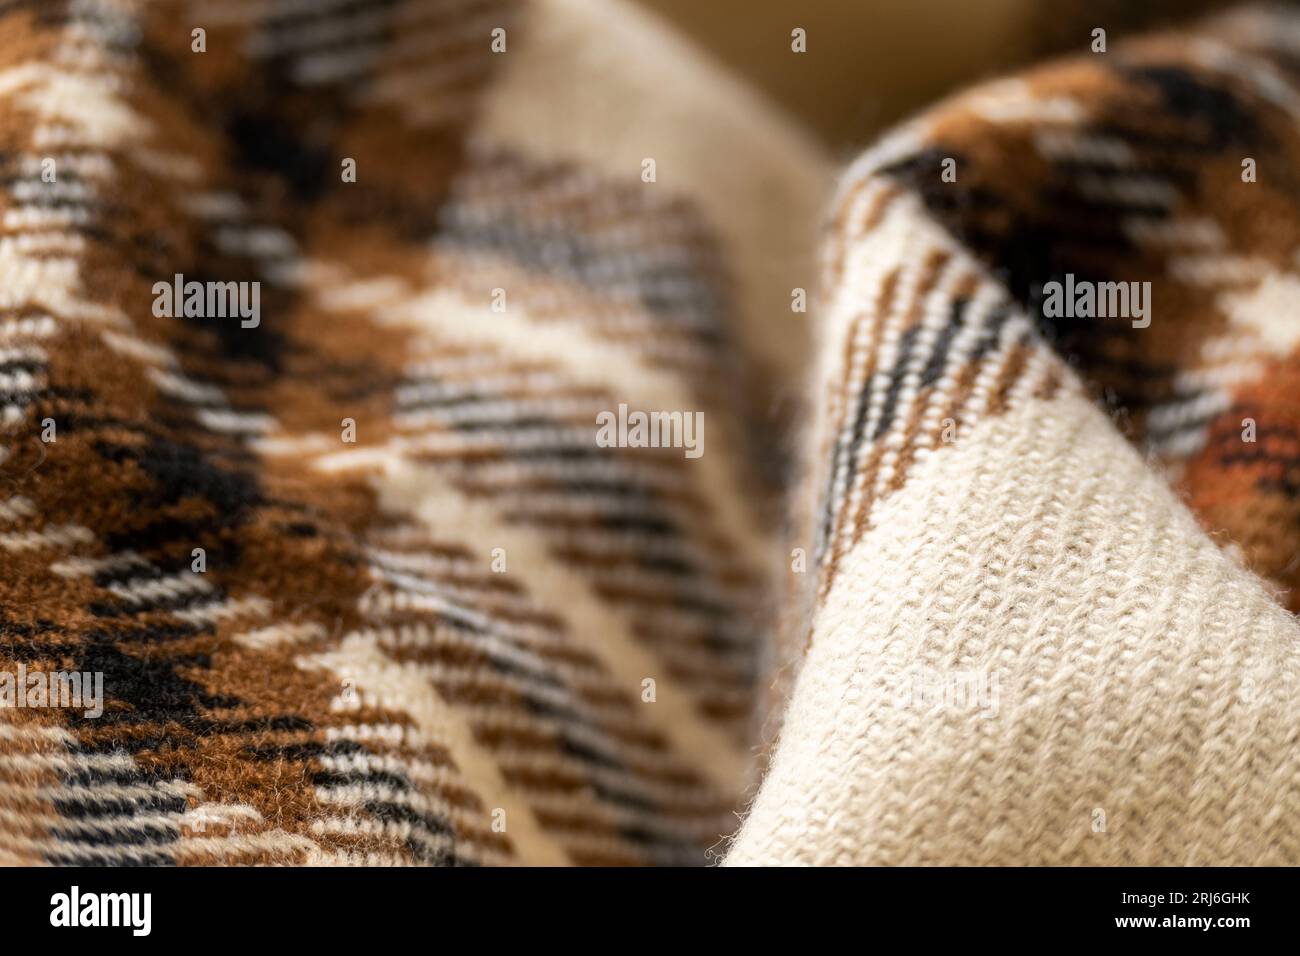 Soft checkered woolen cloth, fashion industry, cozy blanket in warm tones Stock Photo